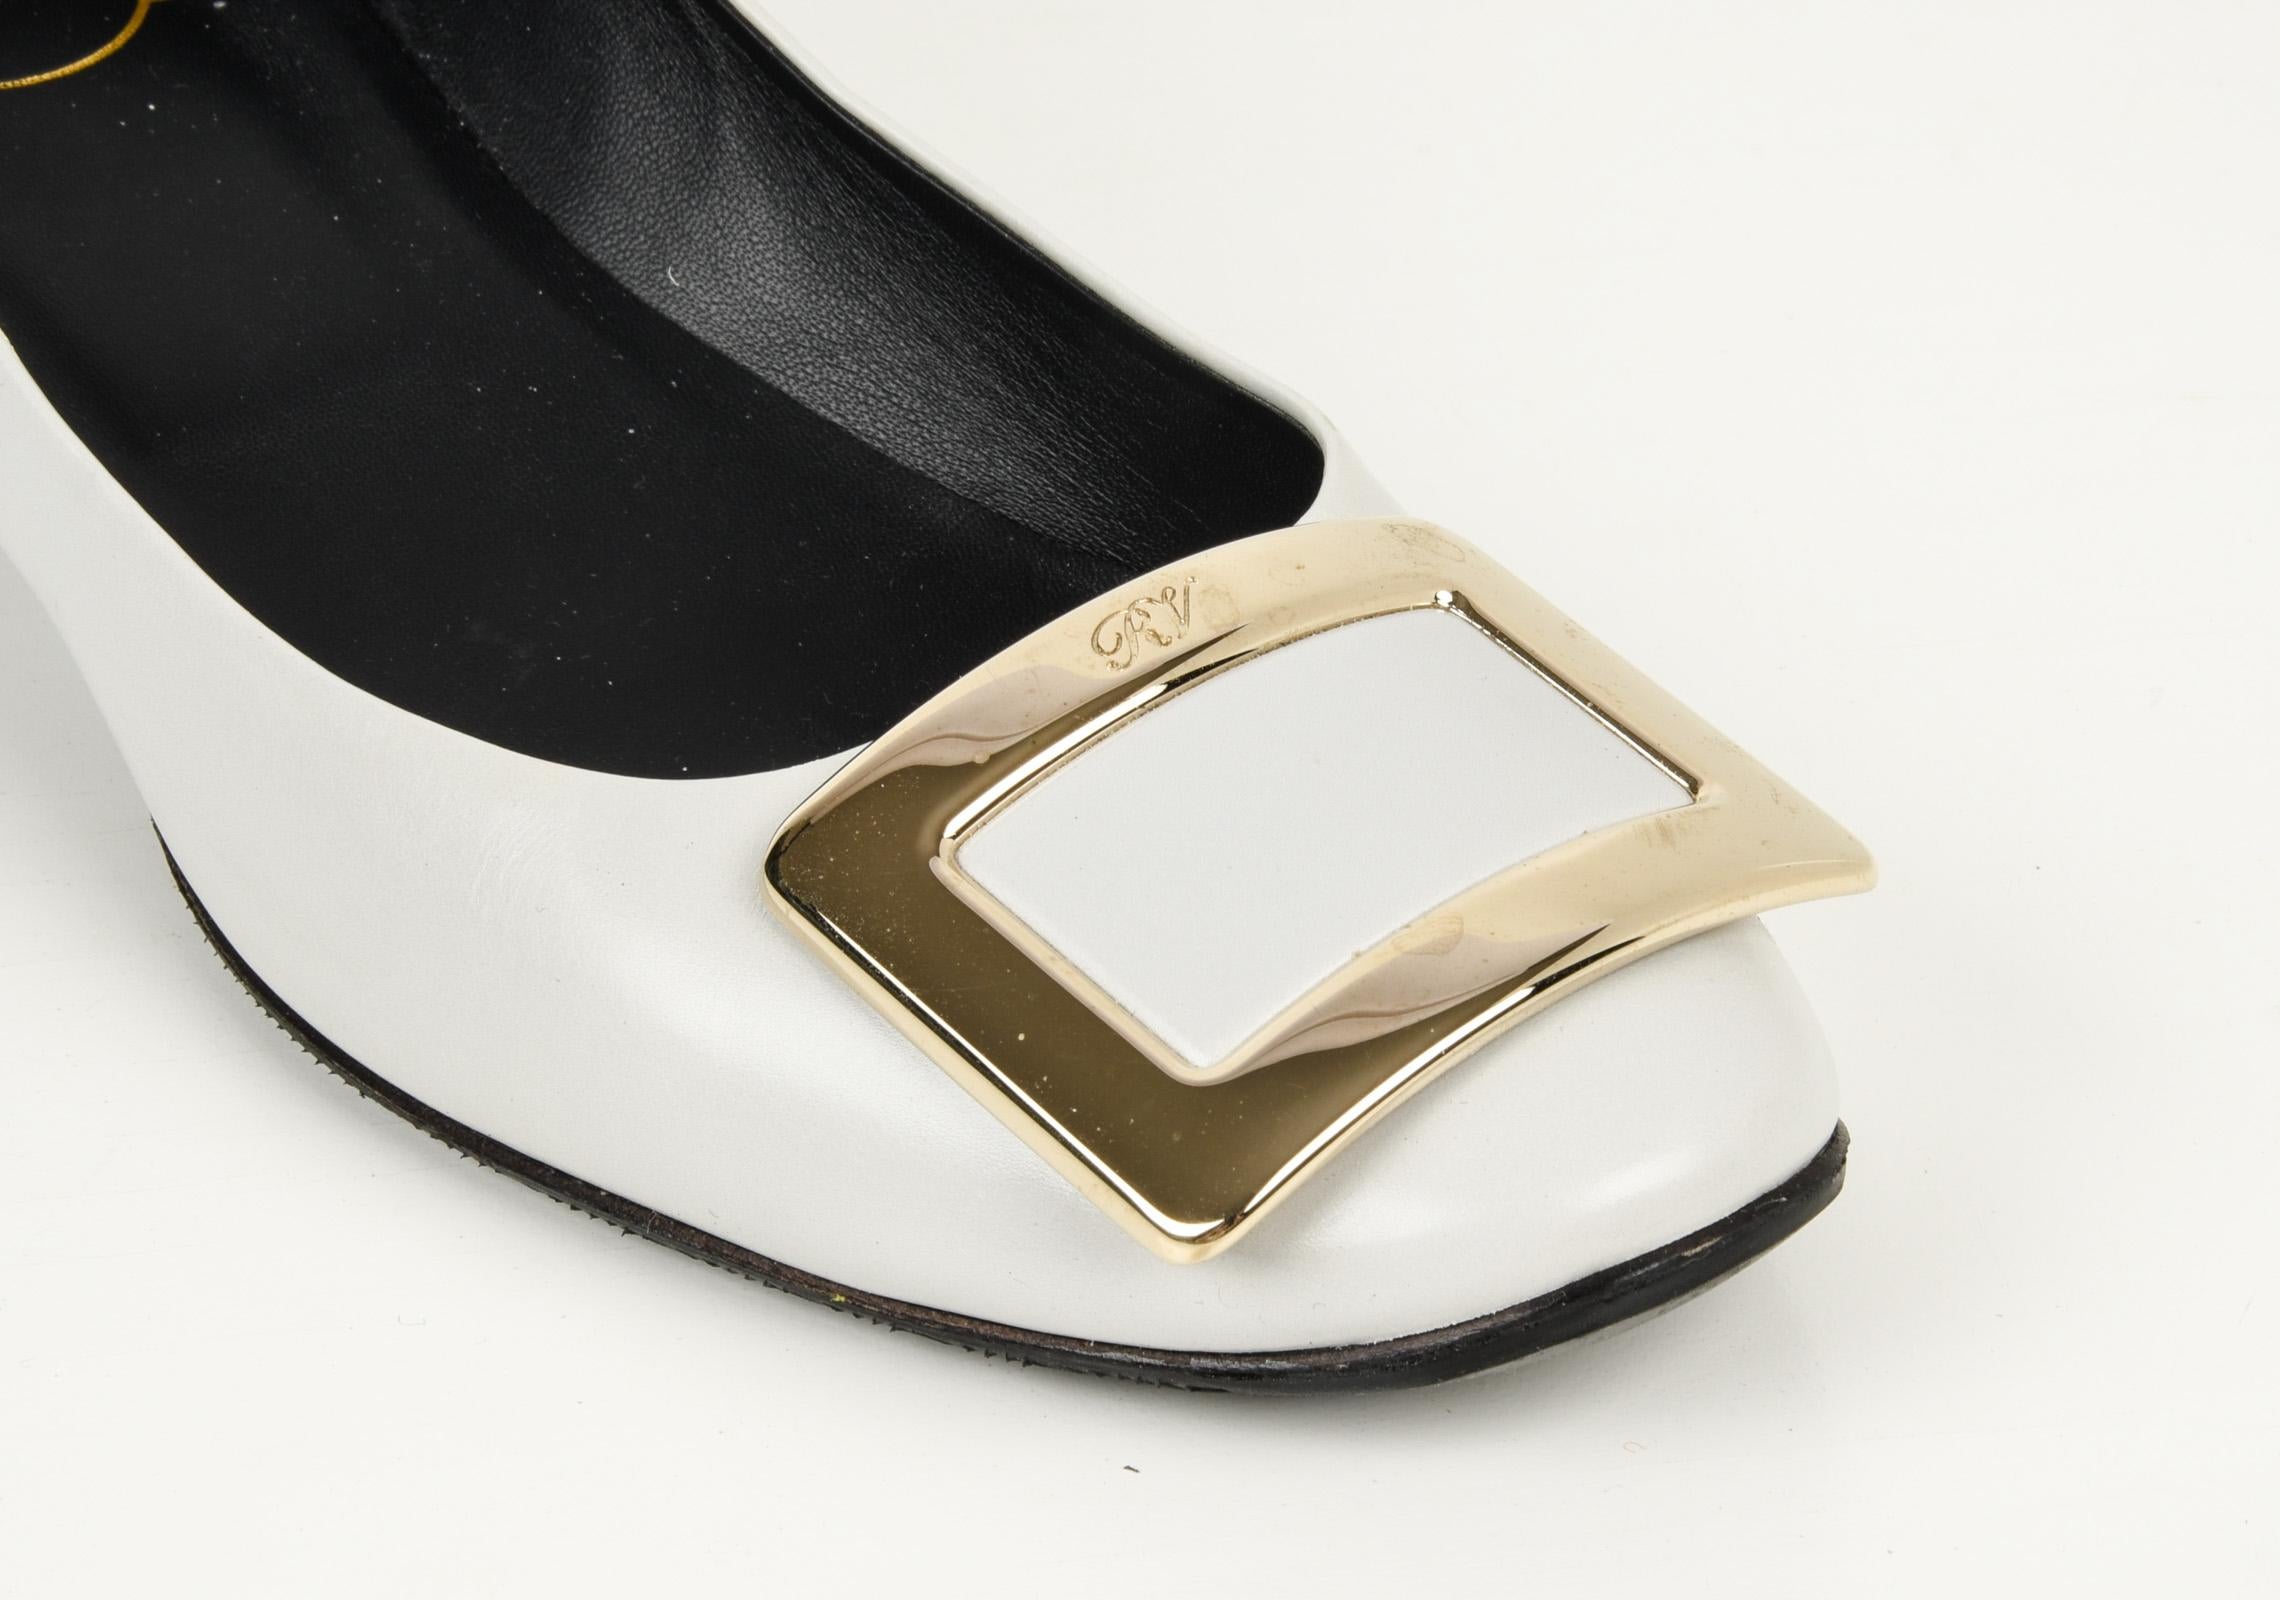 Guaranteed authentic Roger Vivier light dove gray pump. 
Signature metal buckle.
Comes with sleepers and box.
Some natural wear marks - see photos

  
SIZE  38
USA SIZE  8  
    
SHOE  MEASURES:
HEEL  1.25